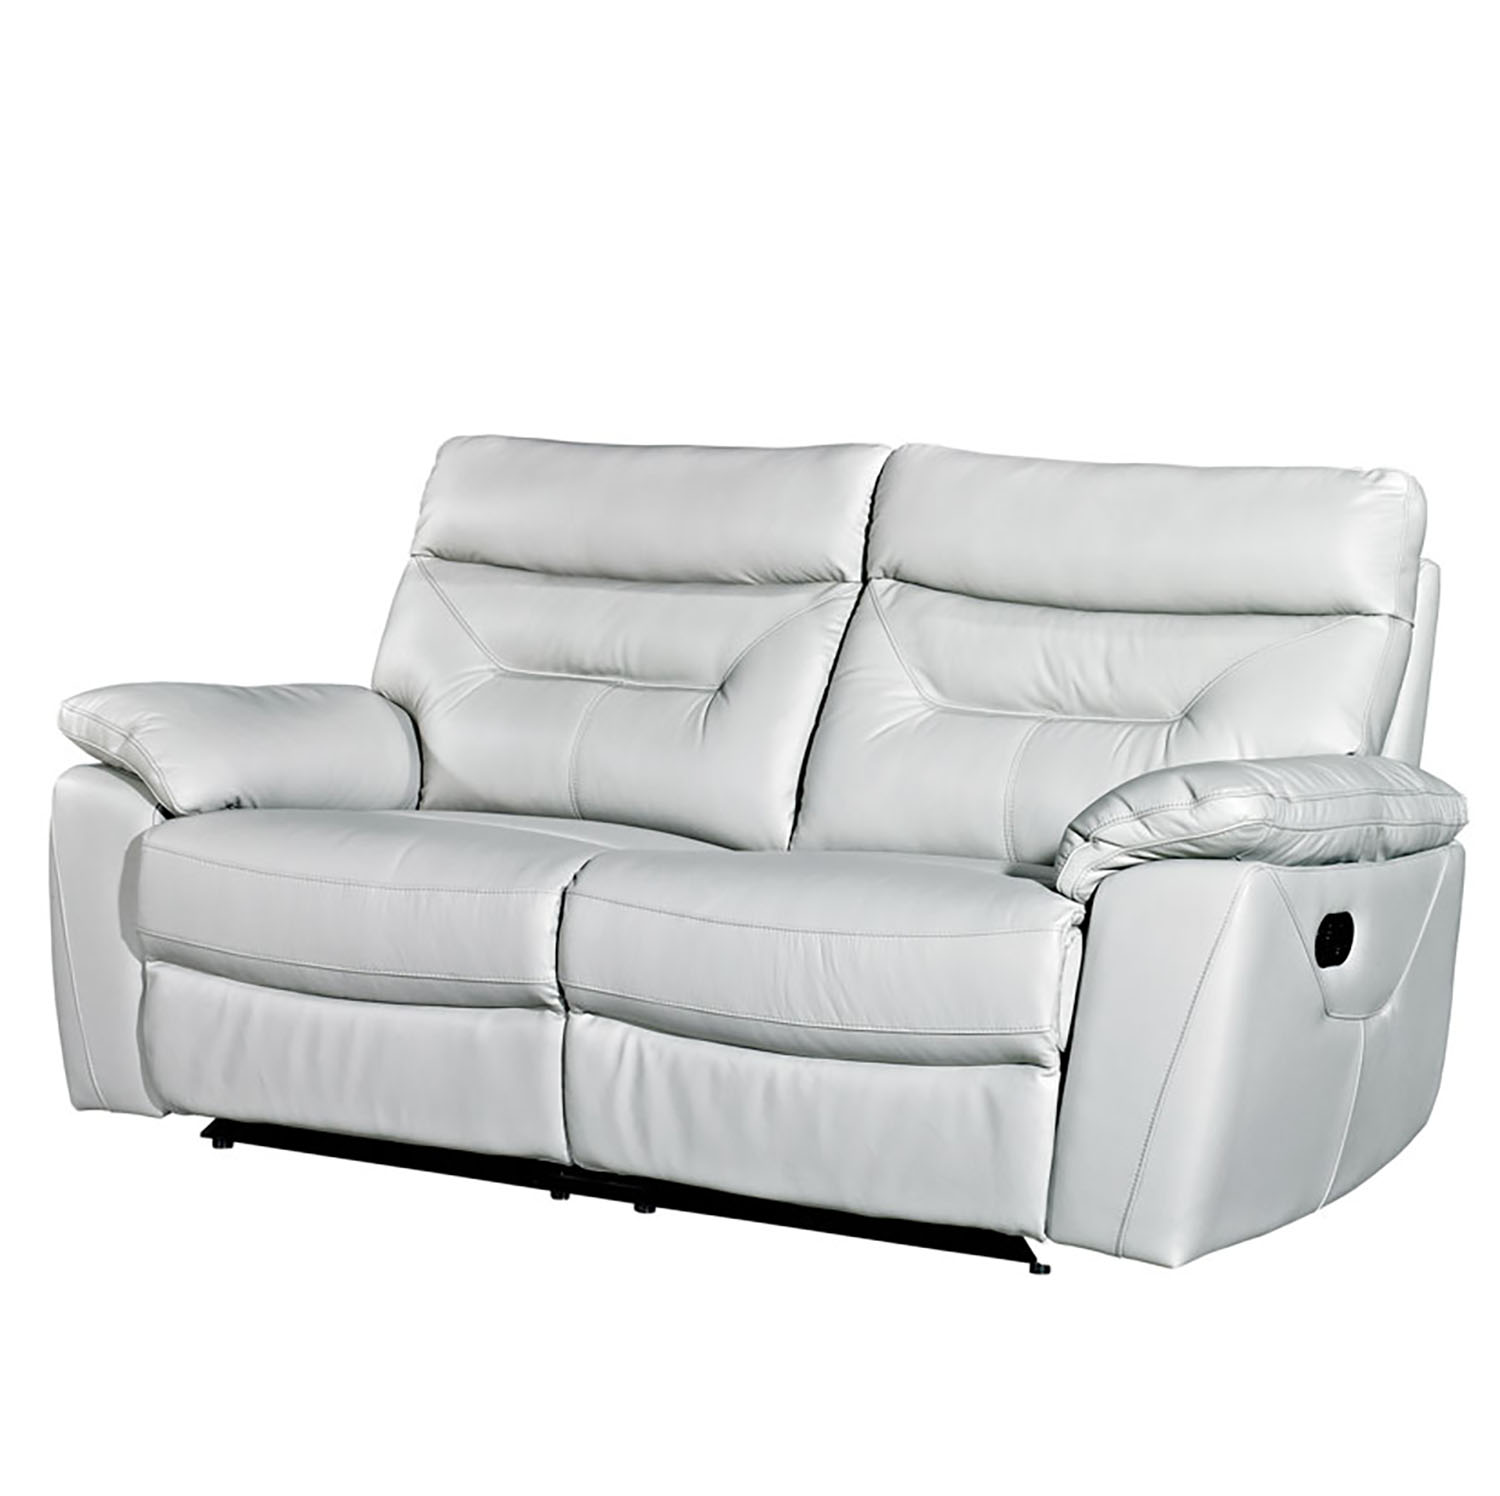 Camo 3 Seater Recliner - Putty 